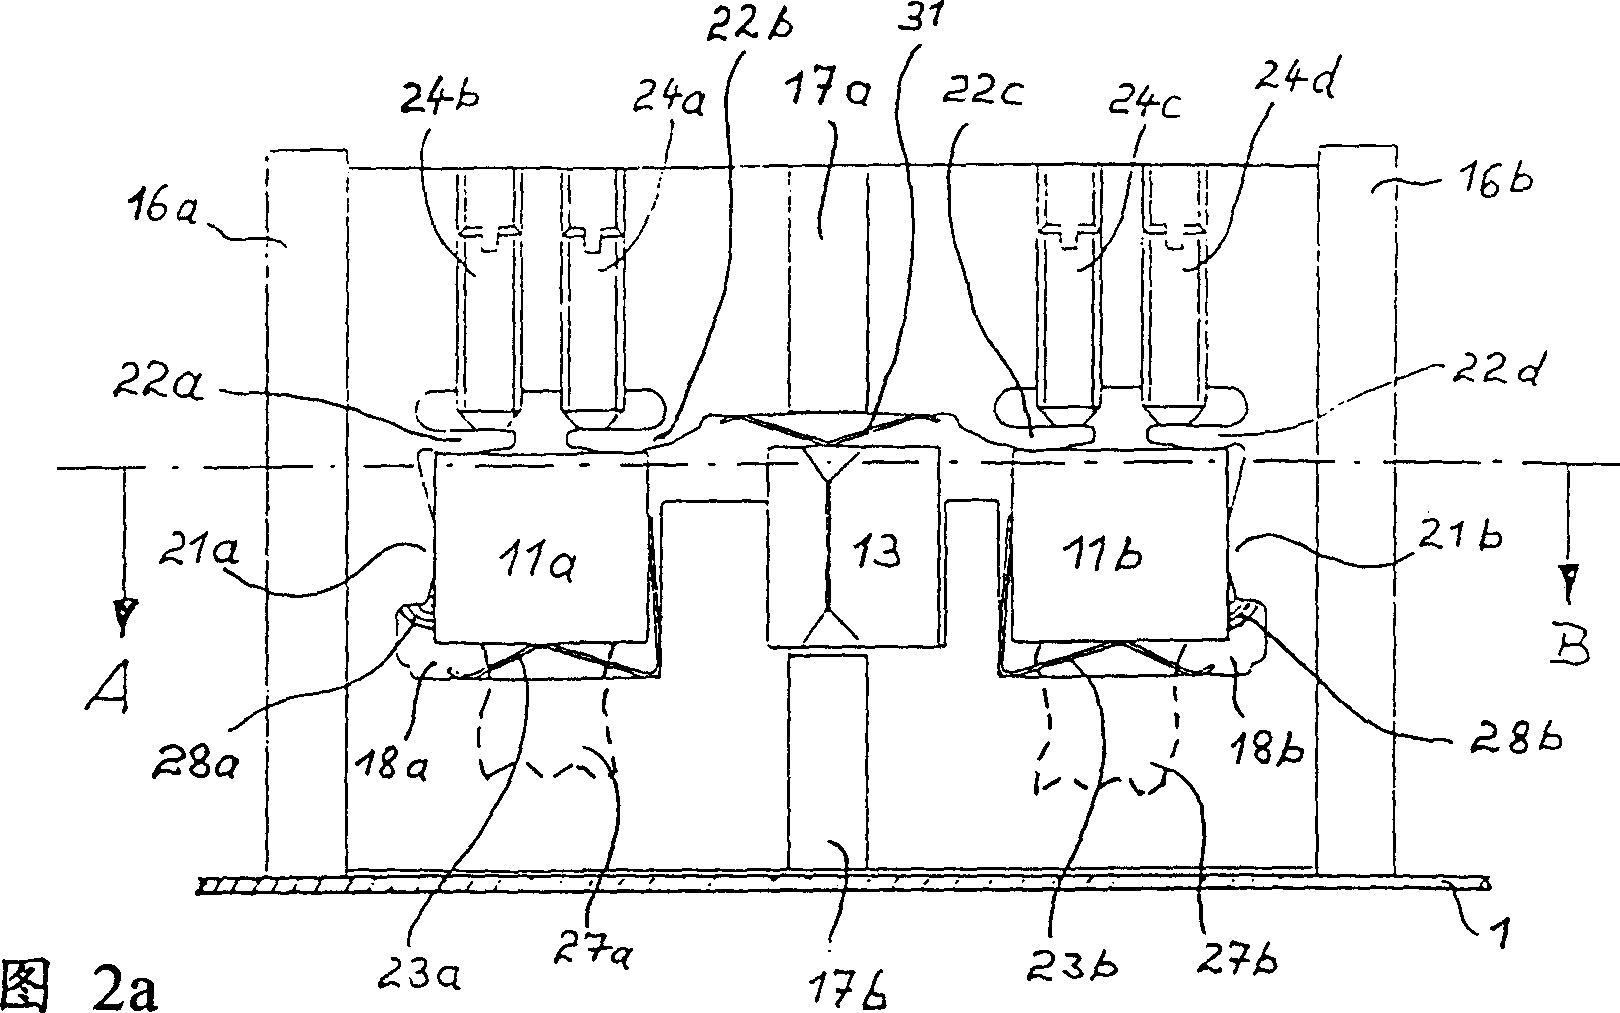 Reading-writing head assembly with multiple magnetic track guided by integrated magnetic tape